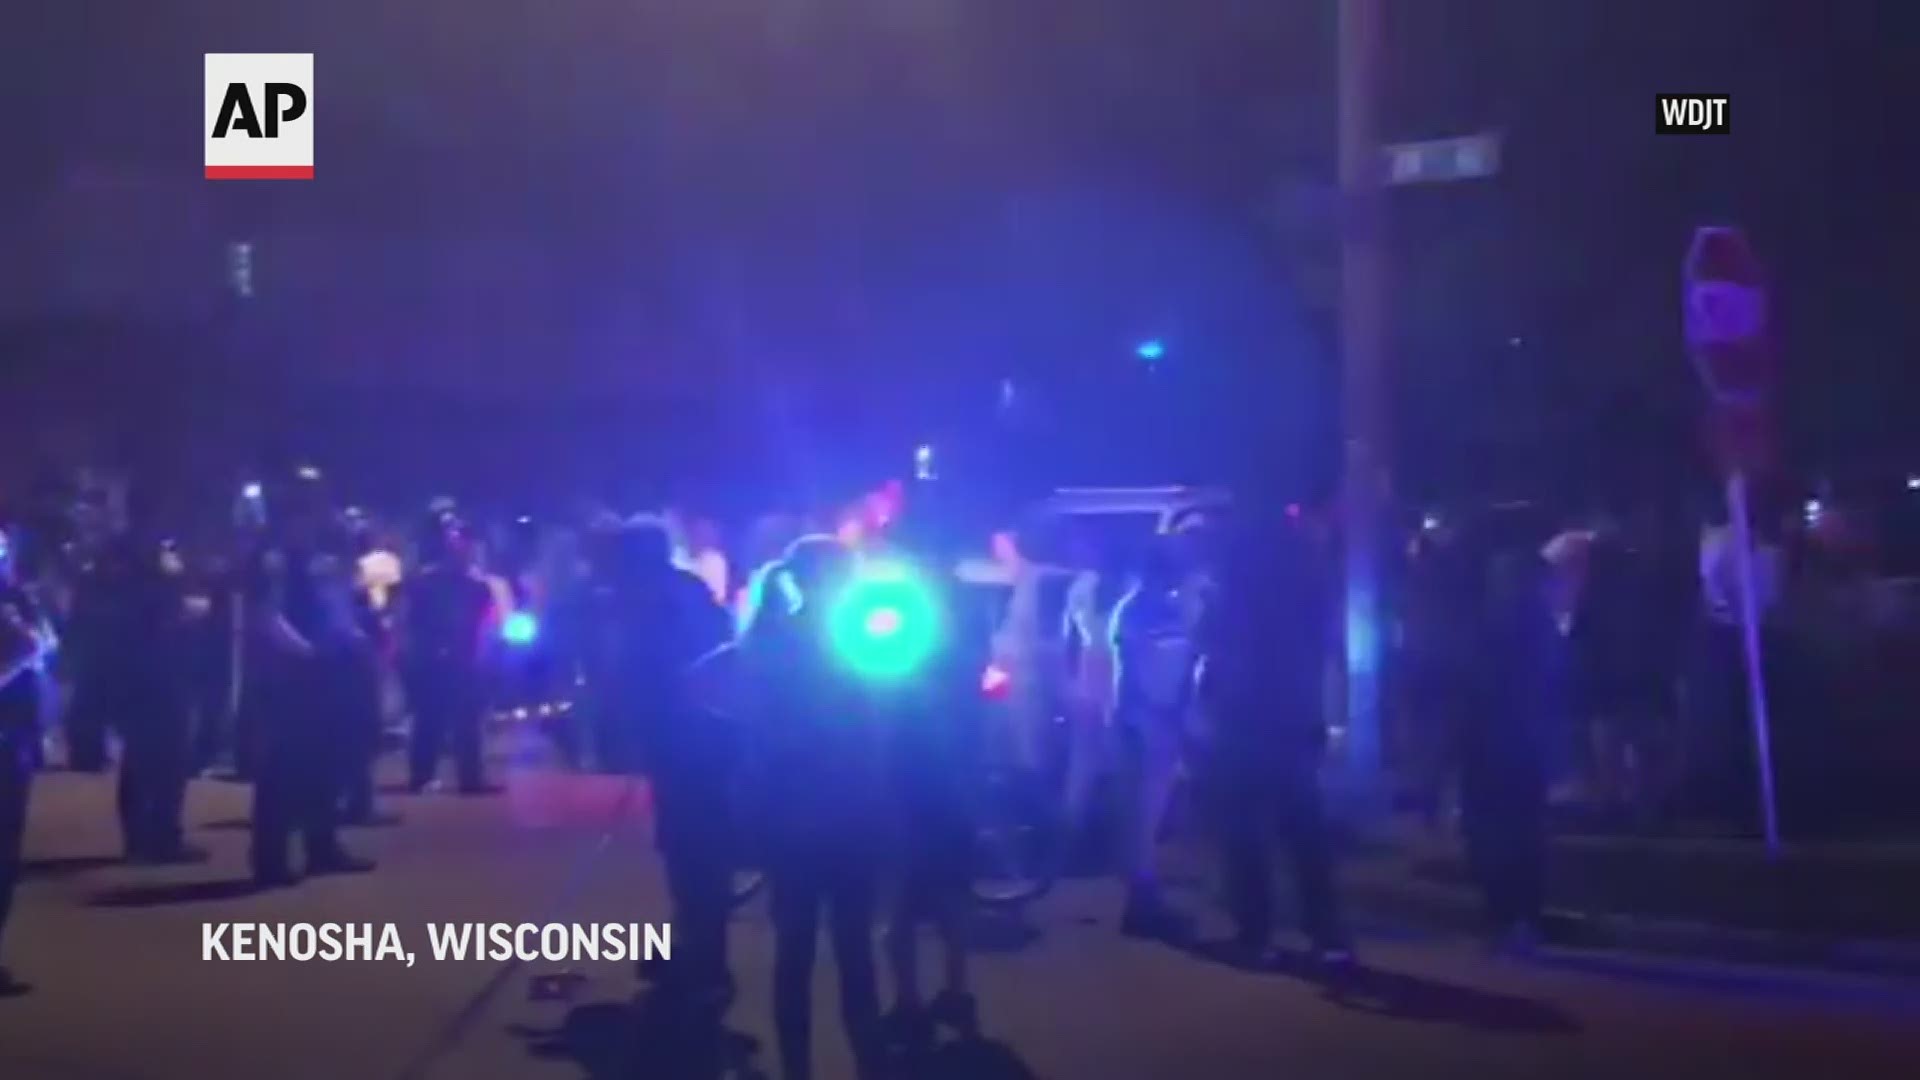 Officers deployed tear gas early Monday to disperse hundreds of people who protested after a police shooting in Kenosha, Wisconsin.